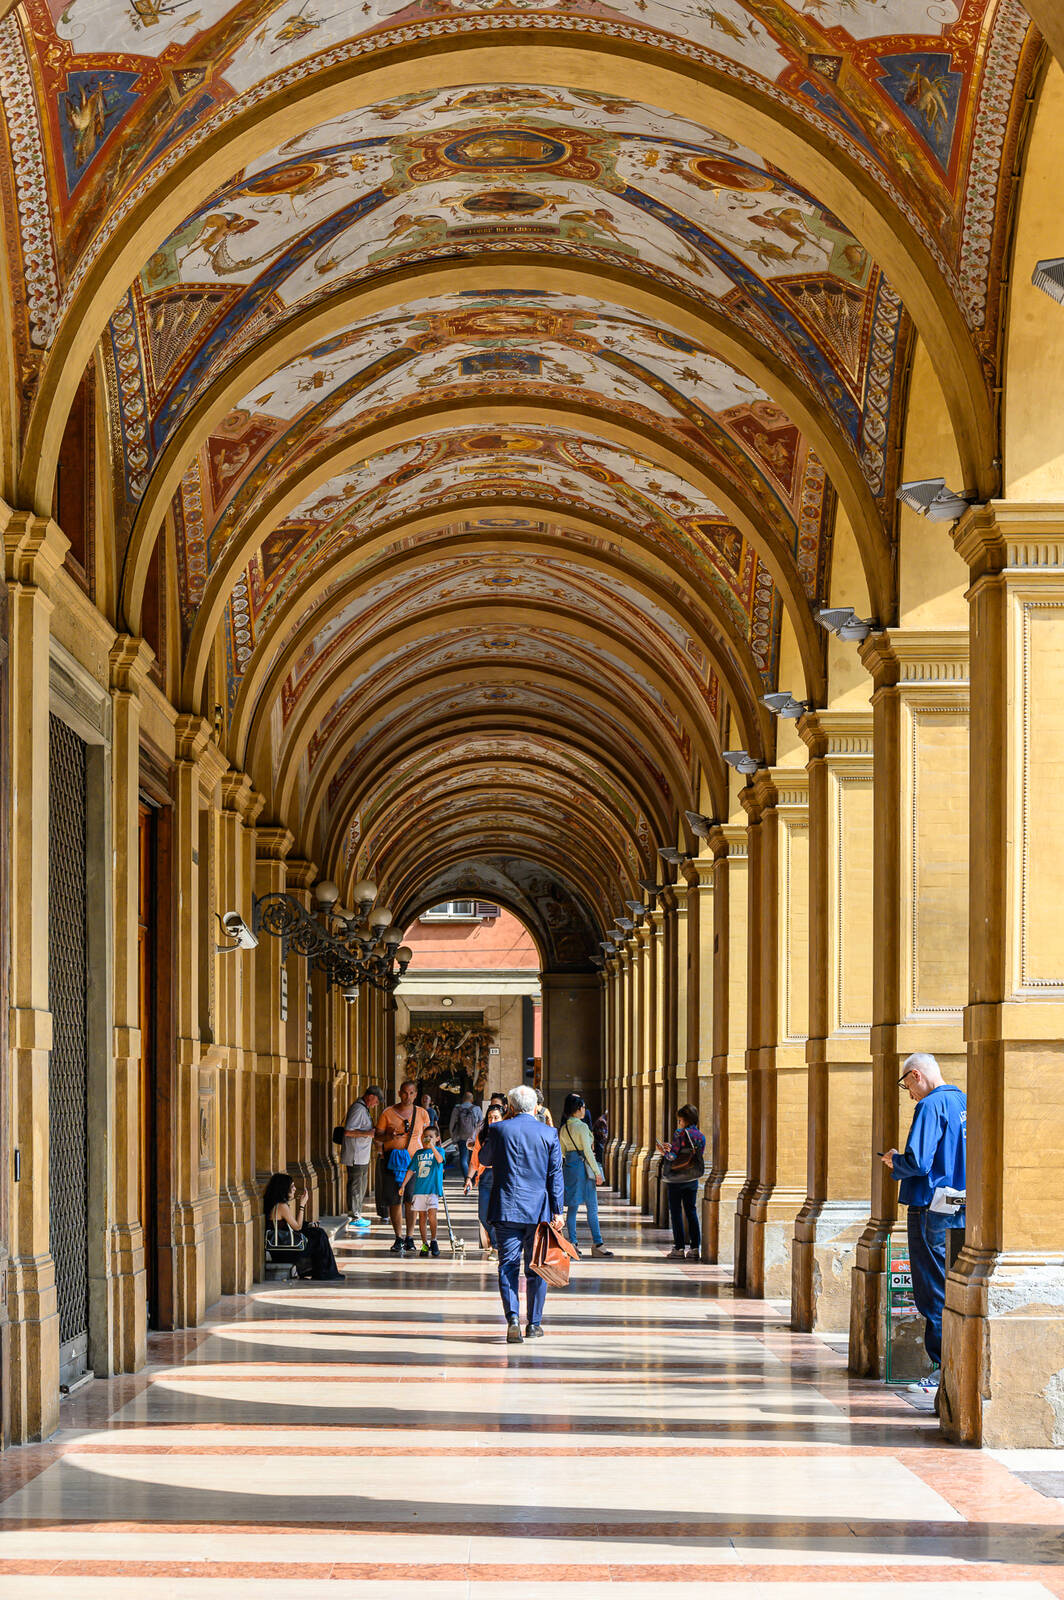 Image of Piazza Cavour by Sue Wolfe